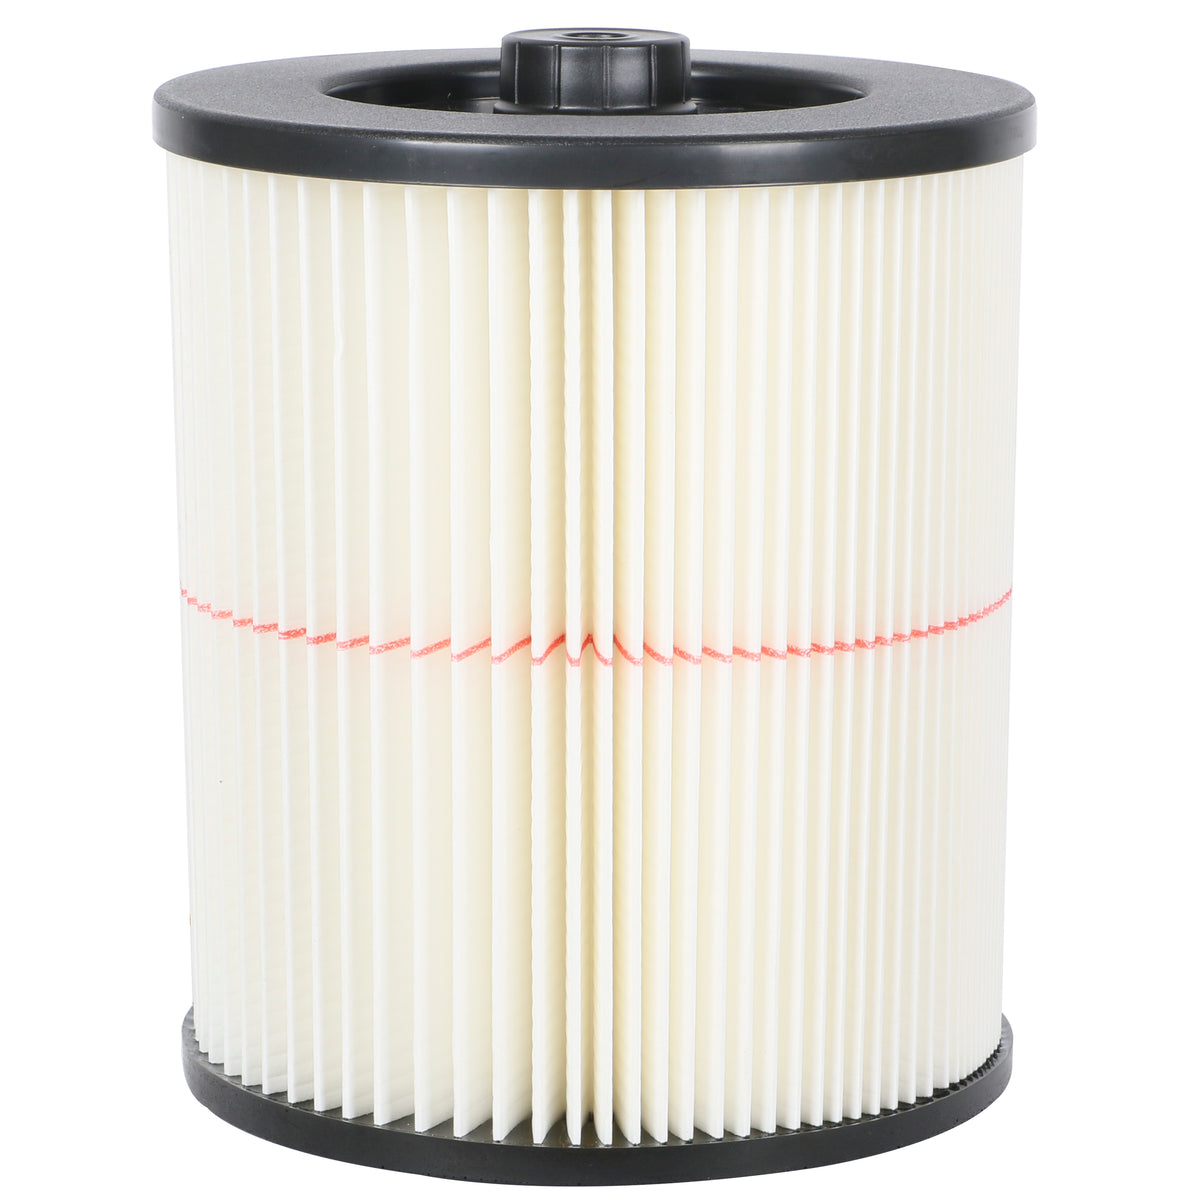 Universal ™ Standard Dry Pick-Up Cartridge Filter for Rigid 5-16 Gallon Wet/Dry Vacuums